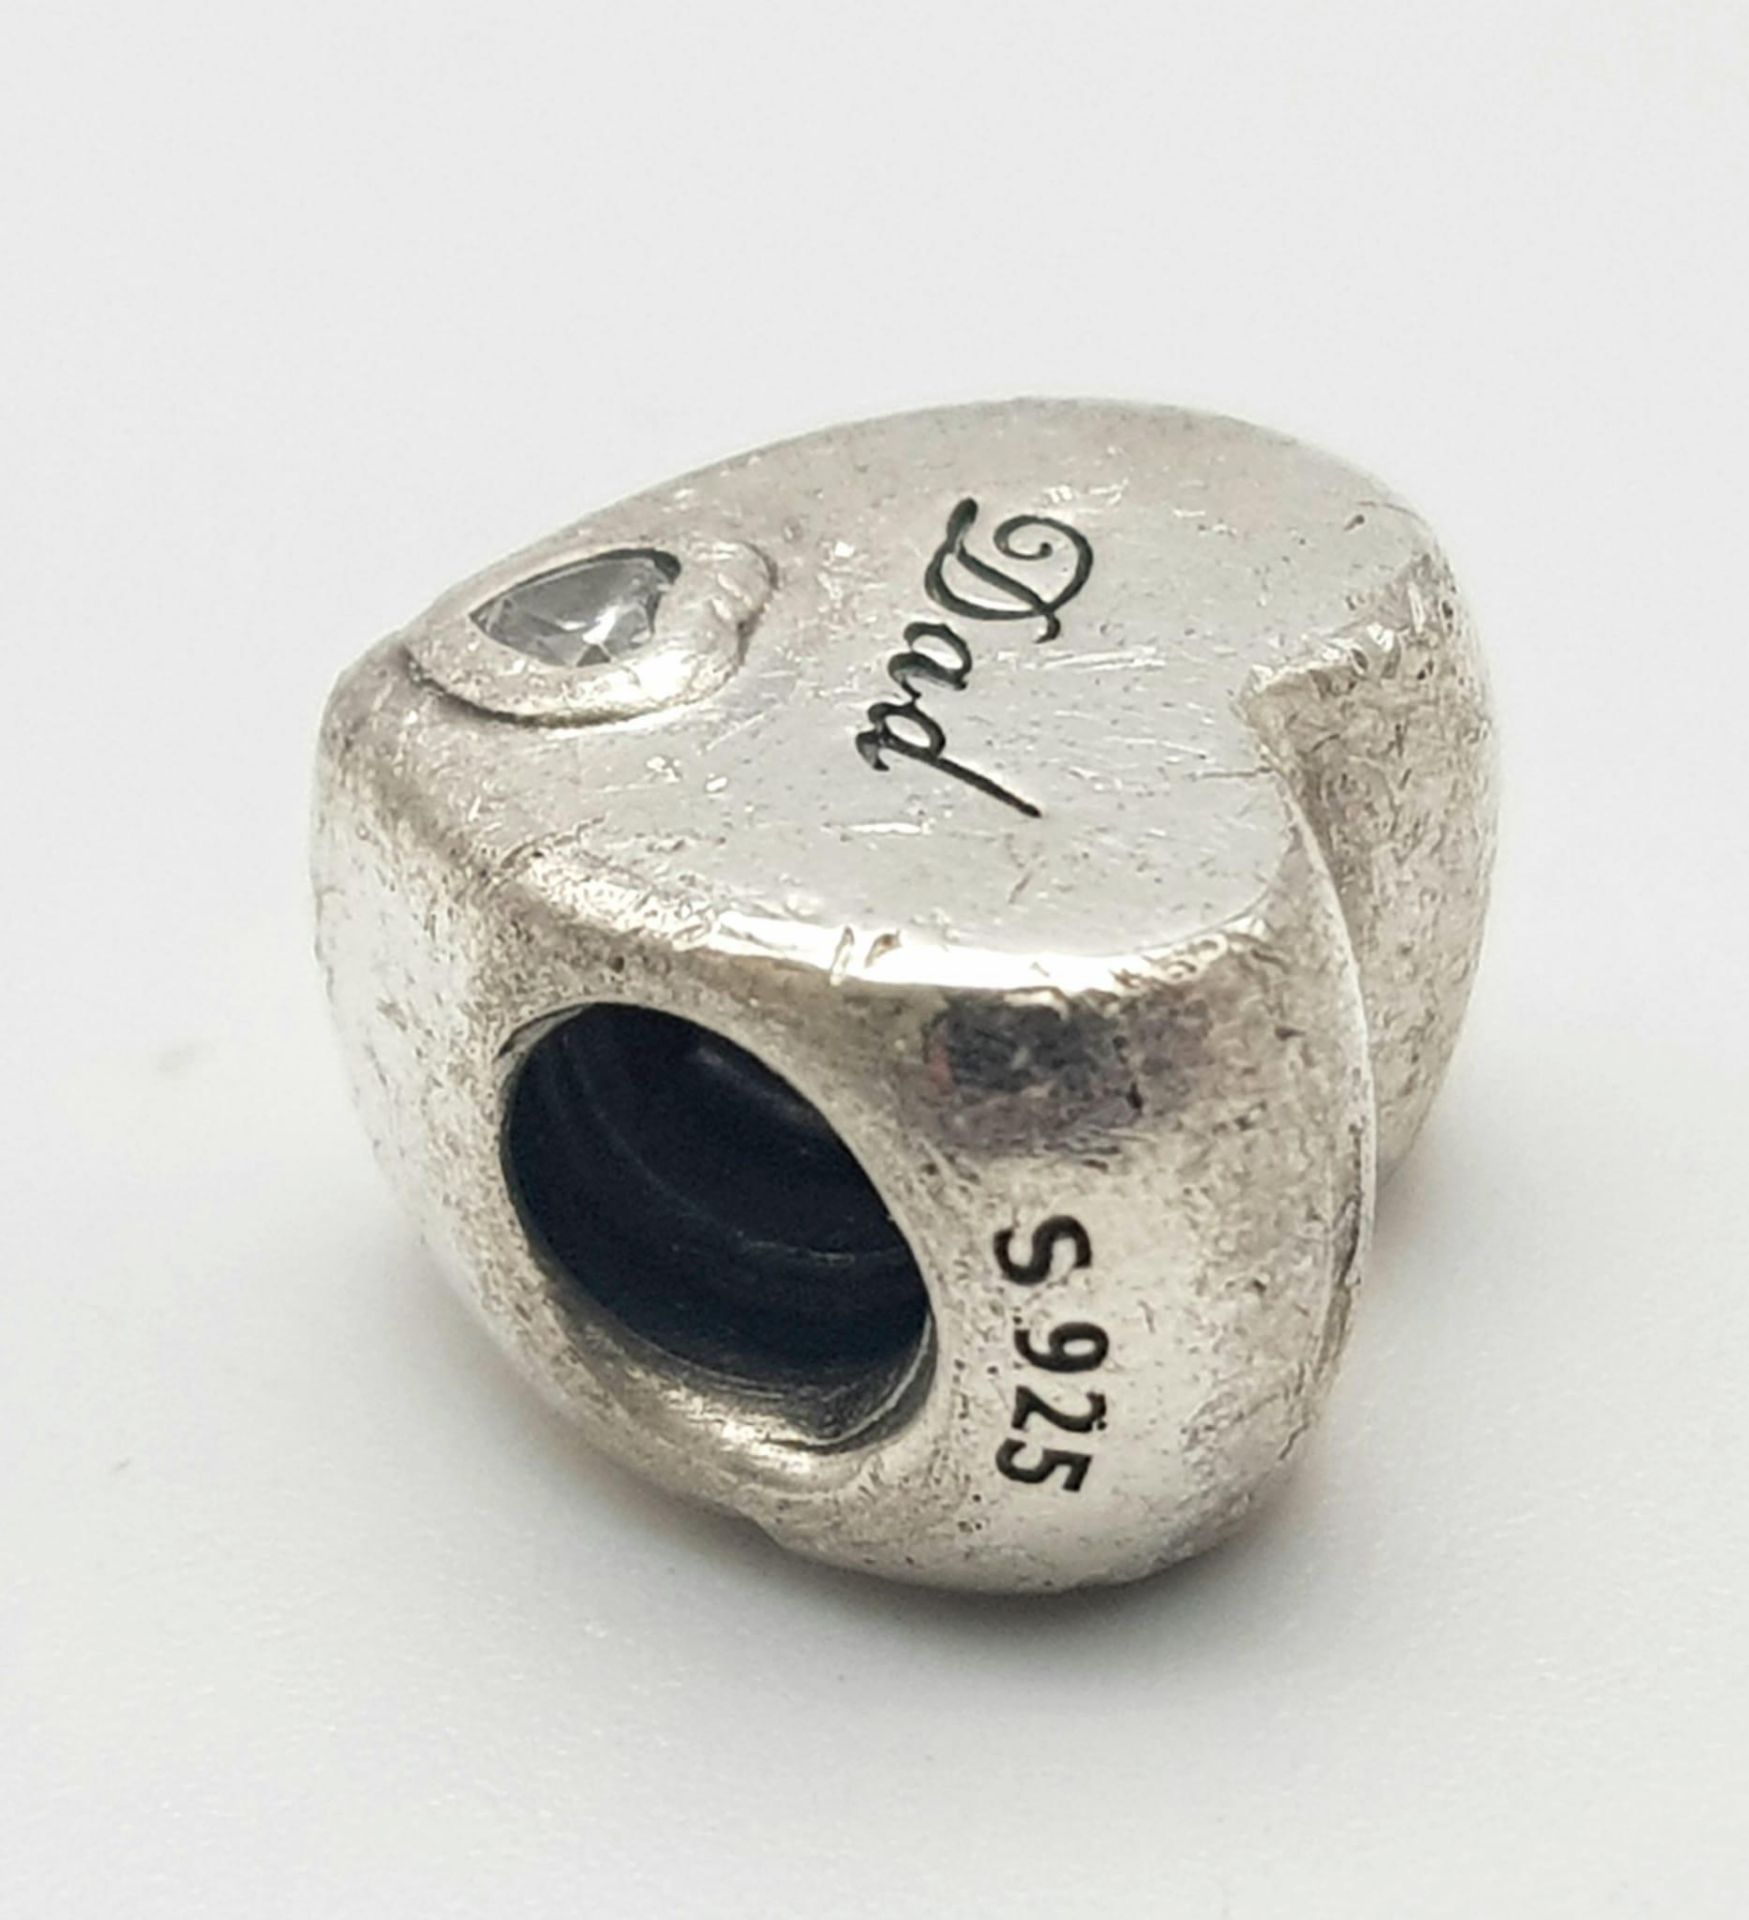 A PANDORA STERLING SILVER HEART SHAPED STONE SET CHARM, ENGRAVED WITH THE WORD "DAD" 3.9G ref: SC - Image 3 of 7